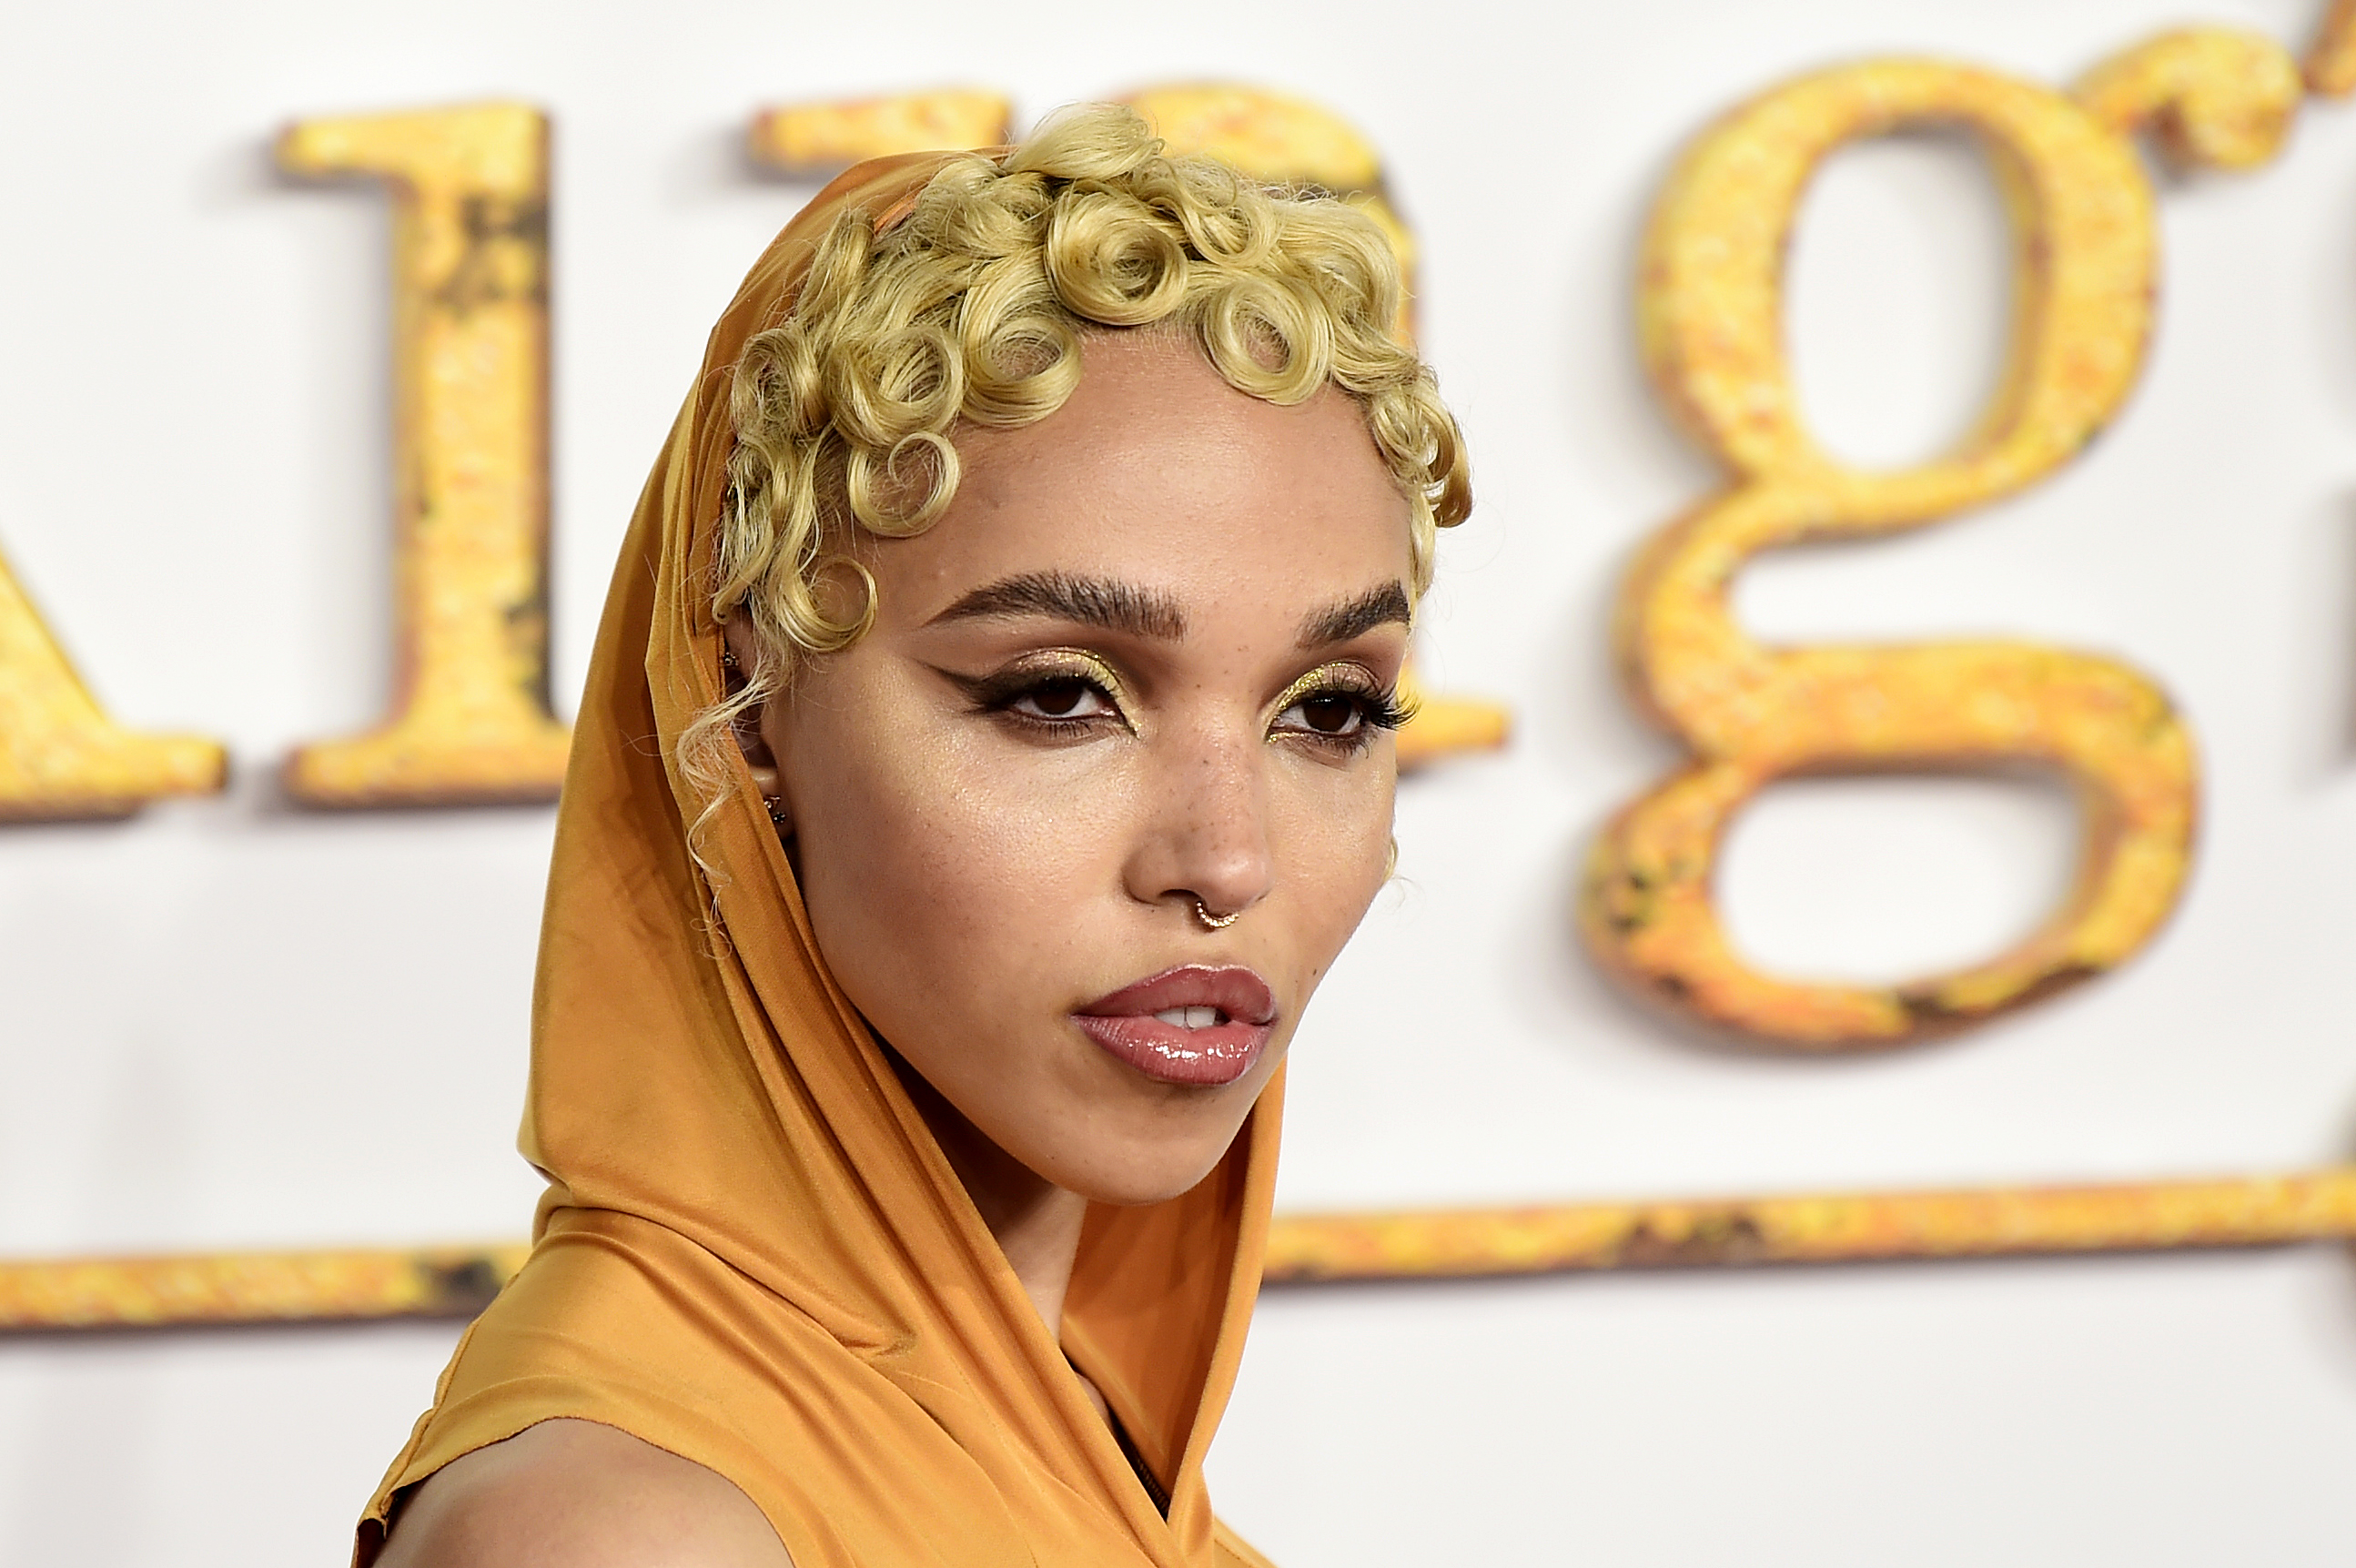 FKA Twigs poses with styled hair and elegant hood on the red carpet